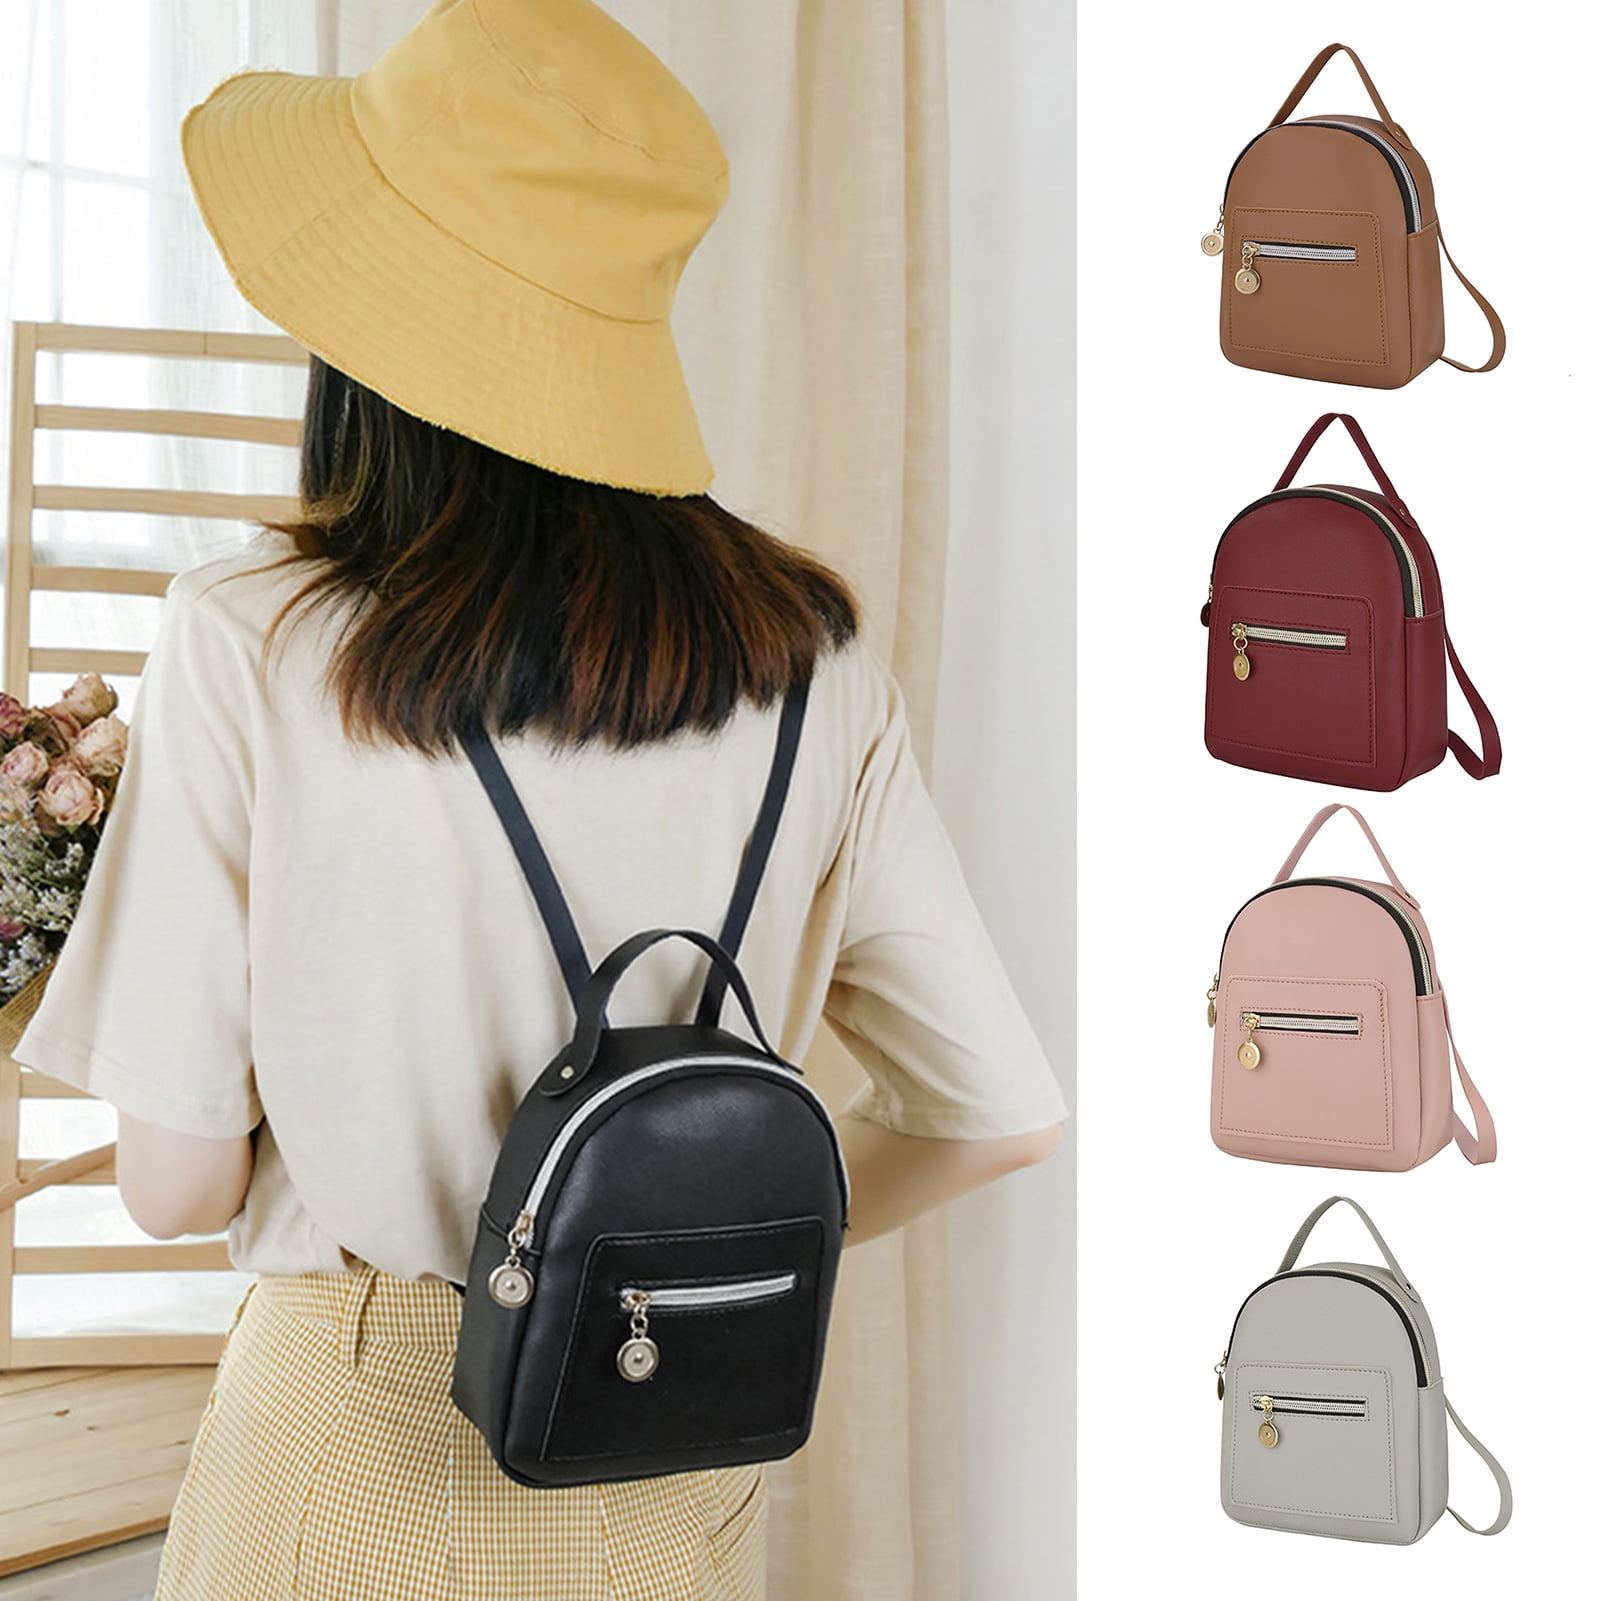 LA TALUS Mini Backpack Zipper Closure Multi Pockets High Capacity Portable Handle Strong Load Bearing Daily Collocation Compact Faux Leather Bag Shop 907526db eaae 4f63 a4d9 798fe7dea47d.549e3b95e39e100bc6af0dccf29b8f0f